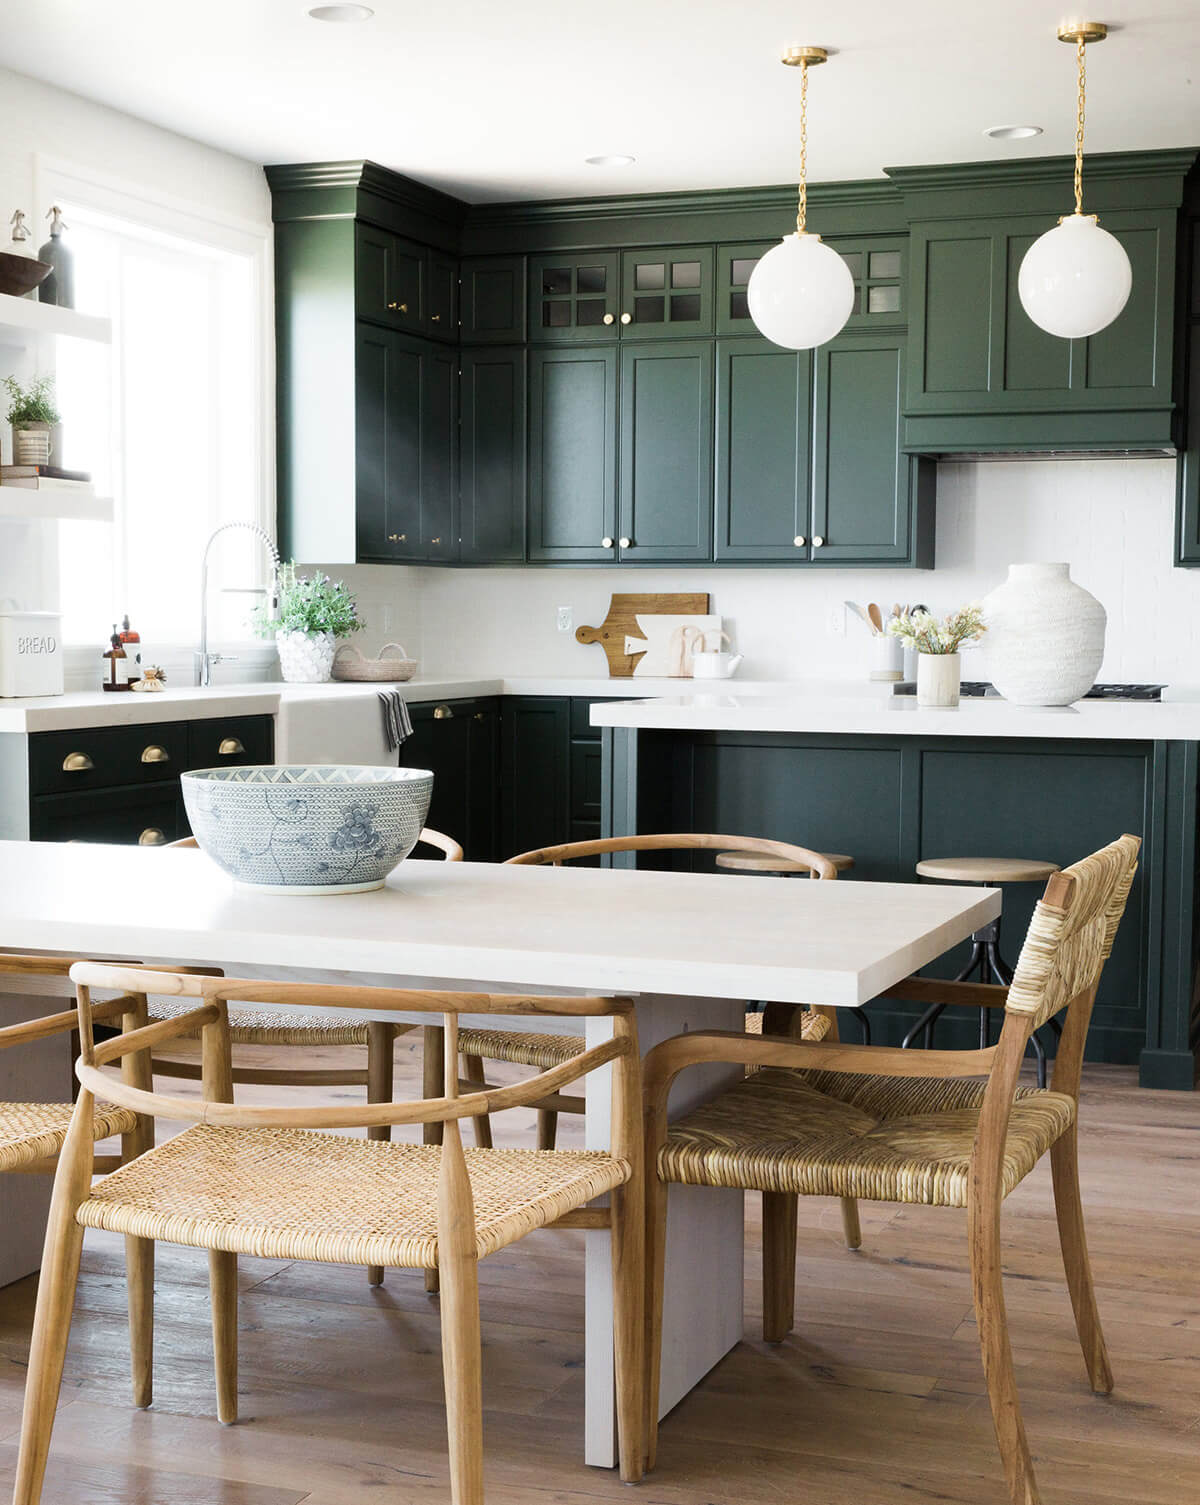 Evoke Life with Green Cabinetry